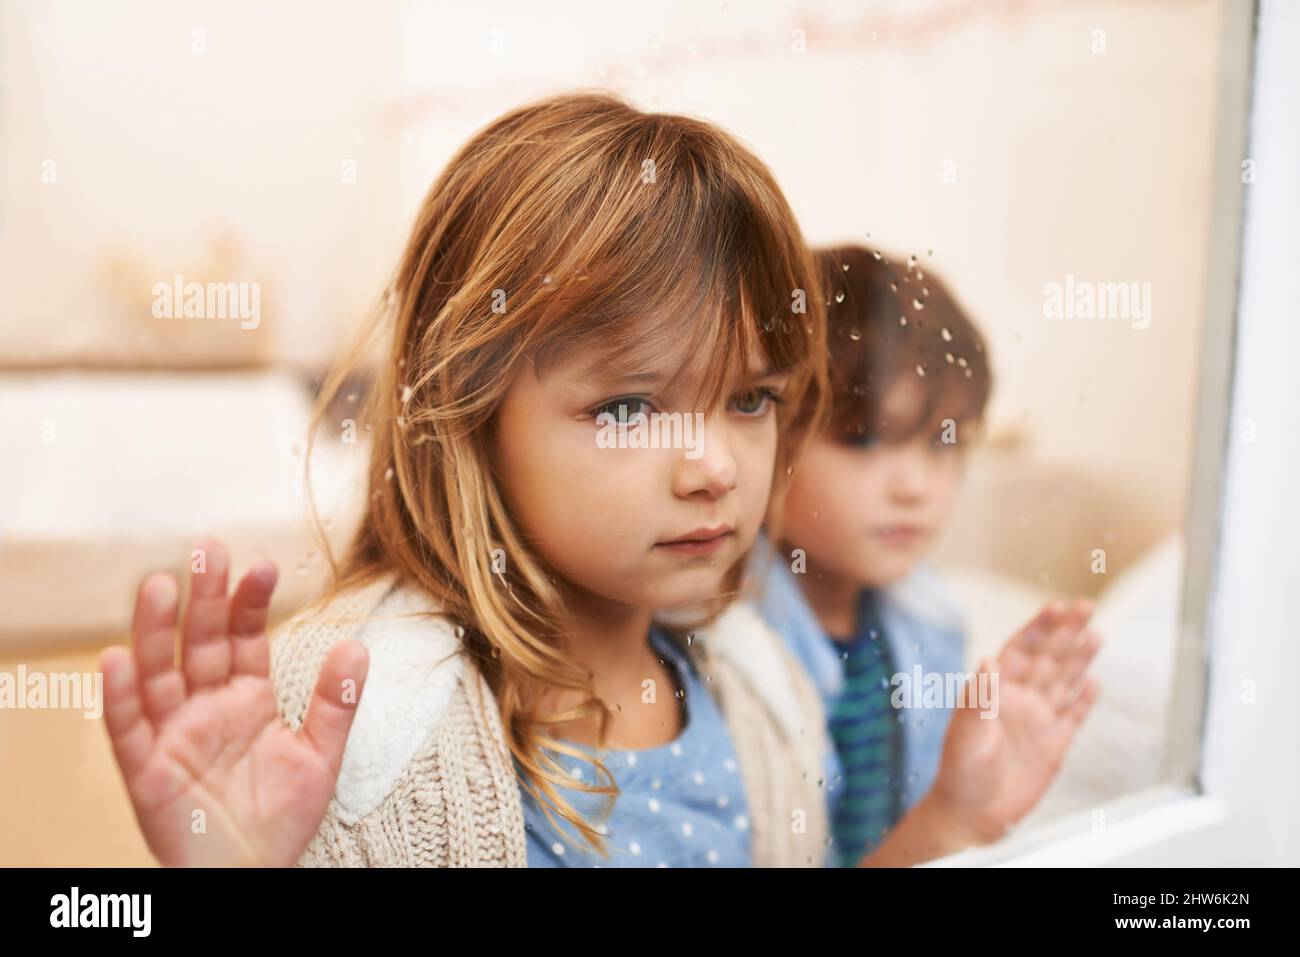 Trapped in a glass box of emotion. Shot of two unhappy-looking young children looking out a window on a rainy day. Stock Photo